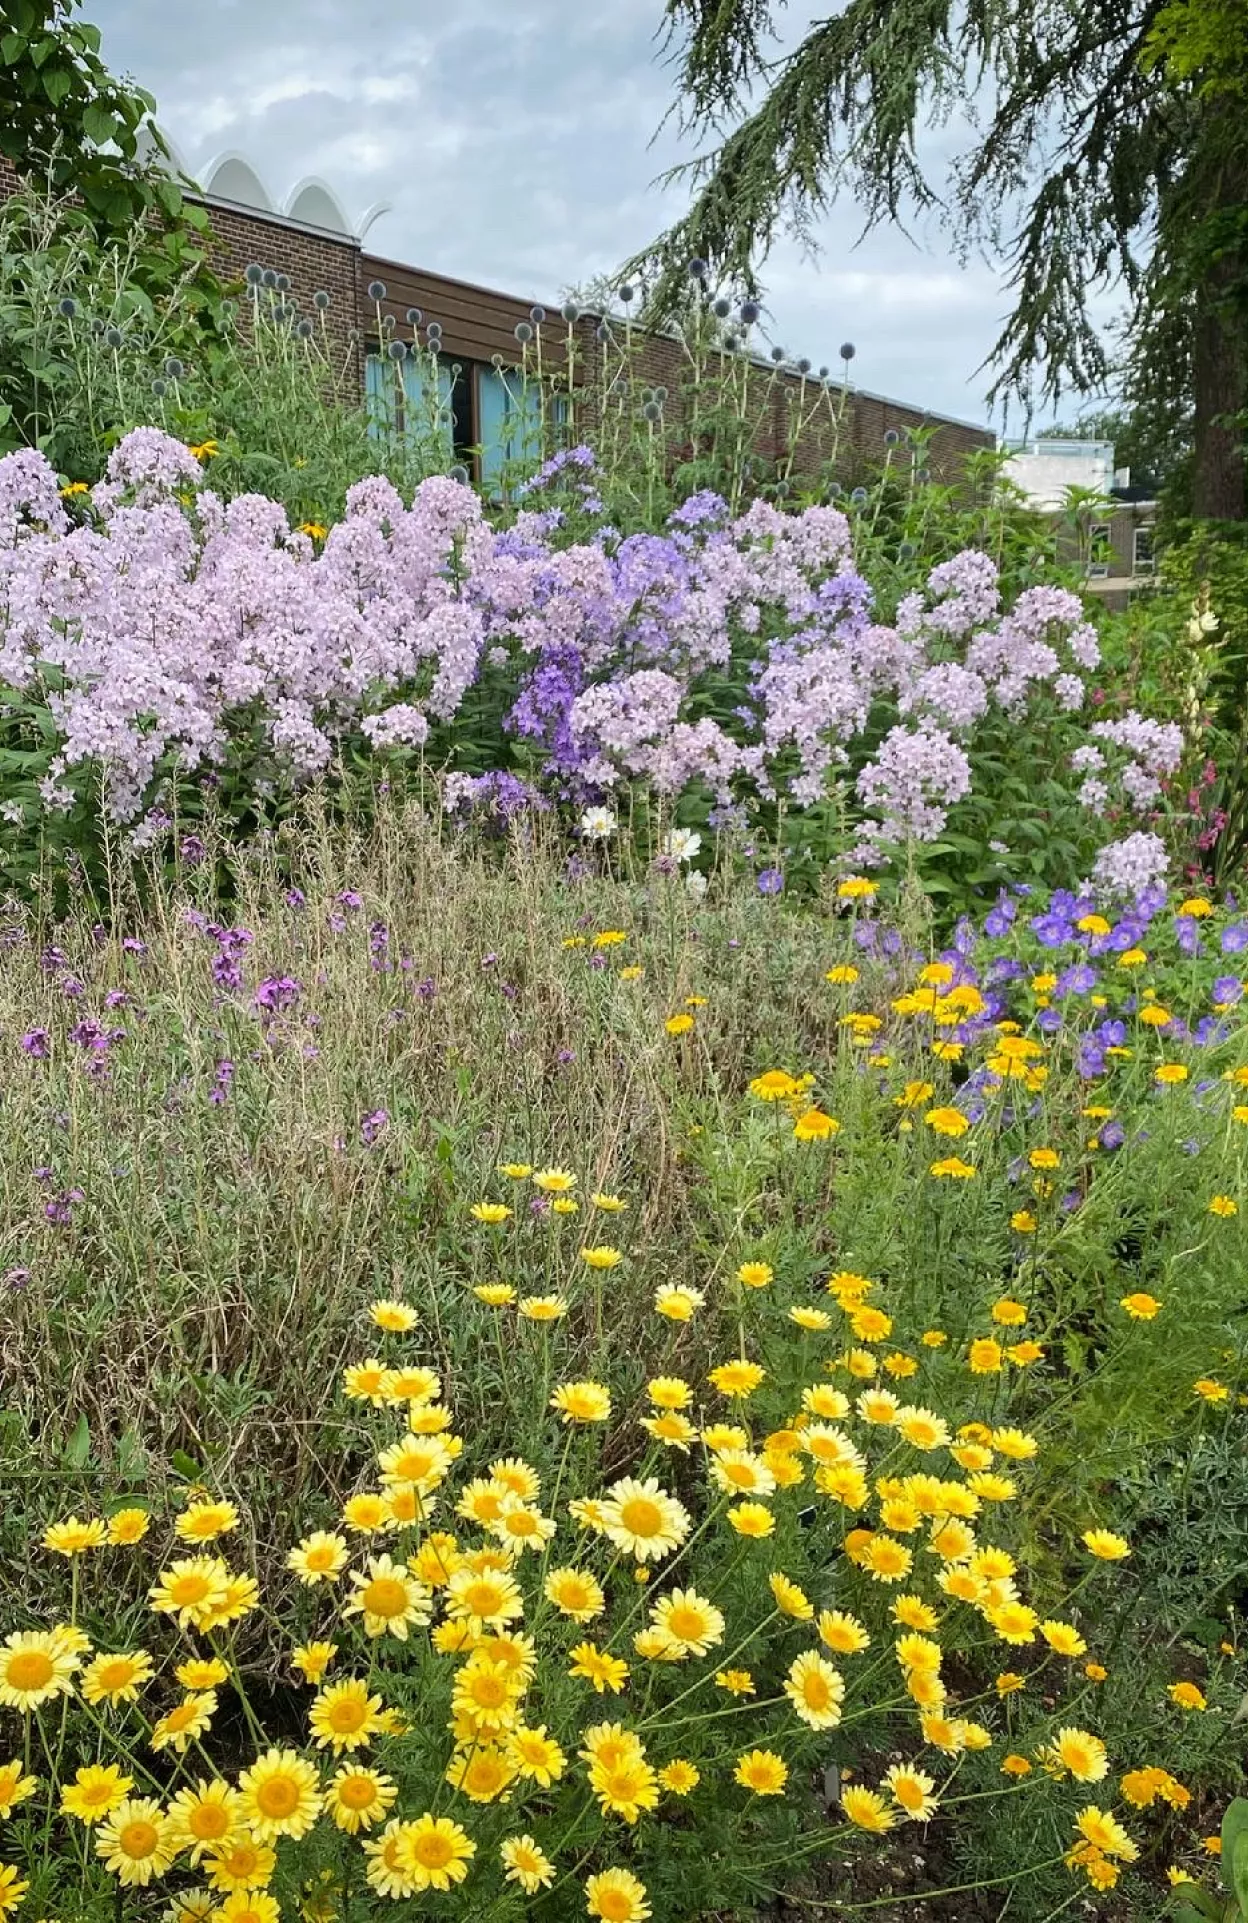 Explosion of yellow and purple flowers